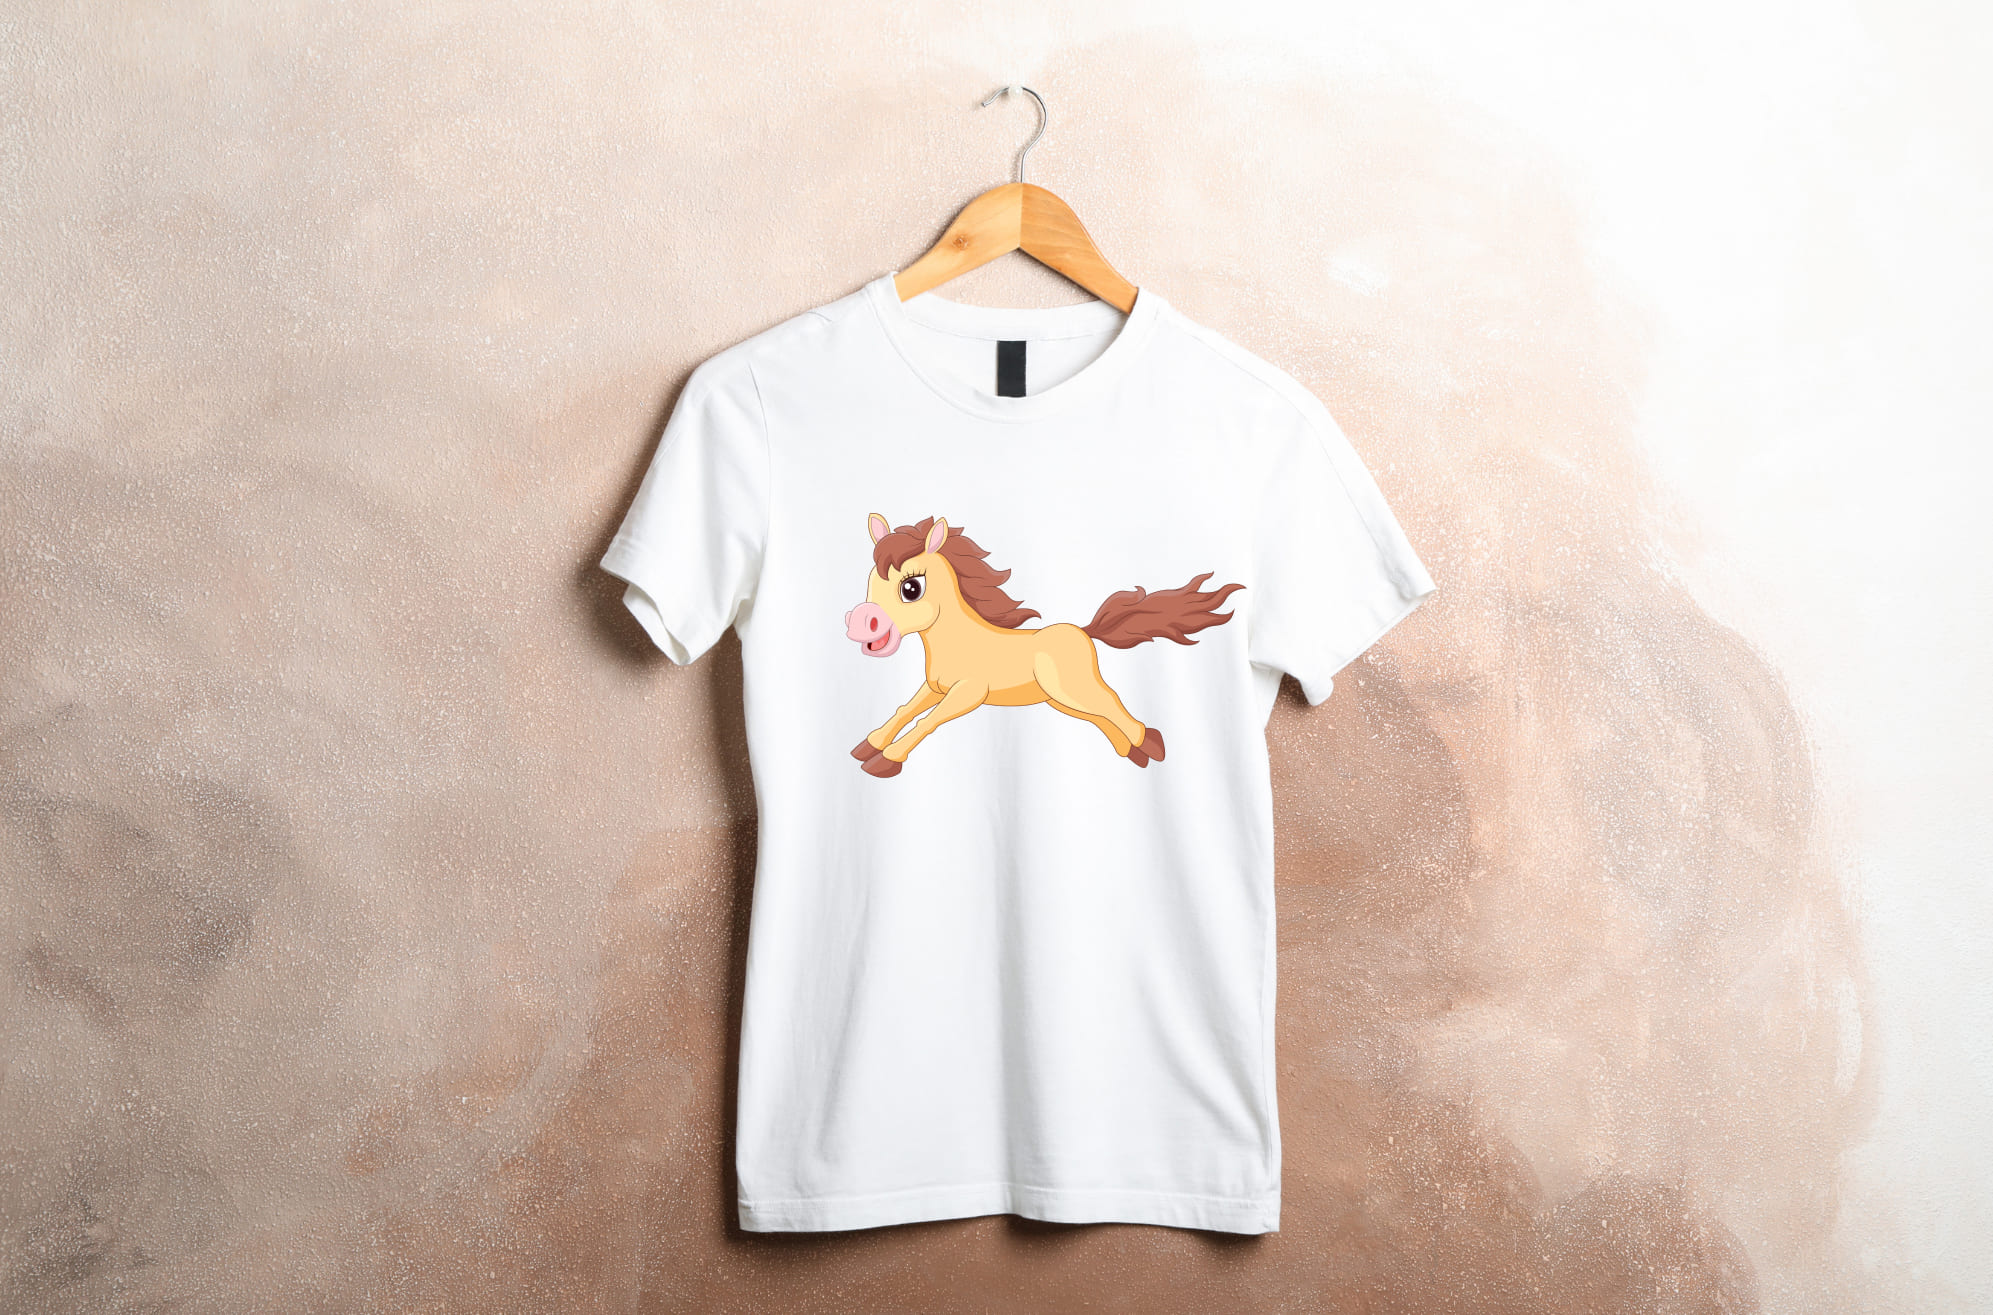 White t-shirt with a running horse on a wooden hanger on a beige background.